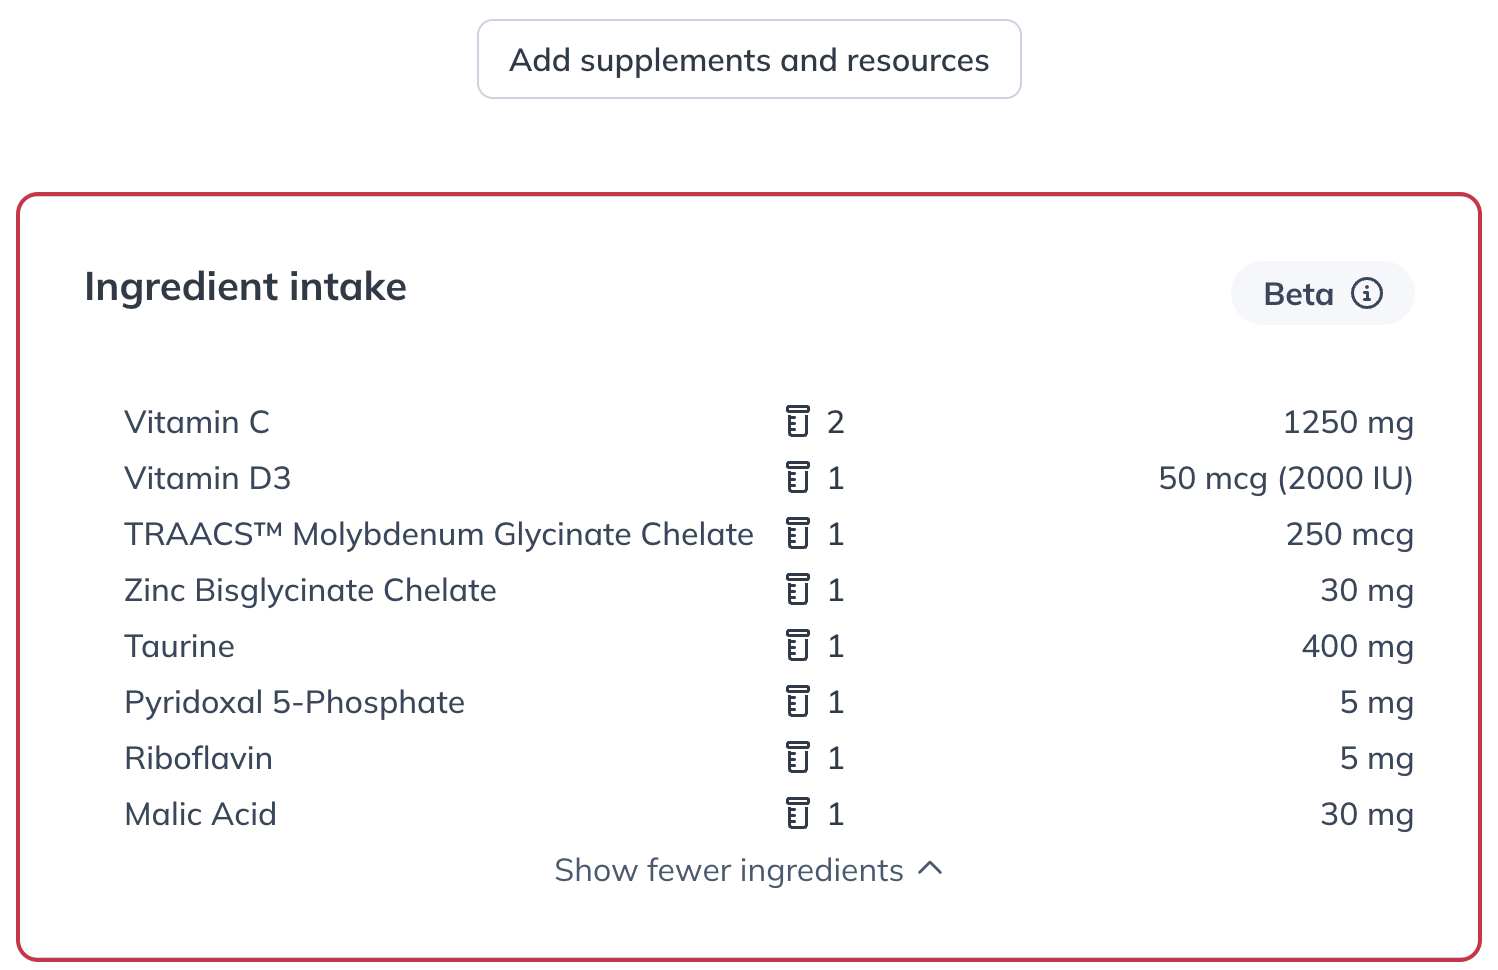 Ingredient intake summary at the bottom of the supplement plan tool